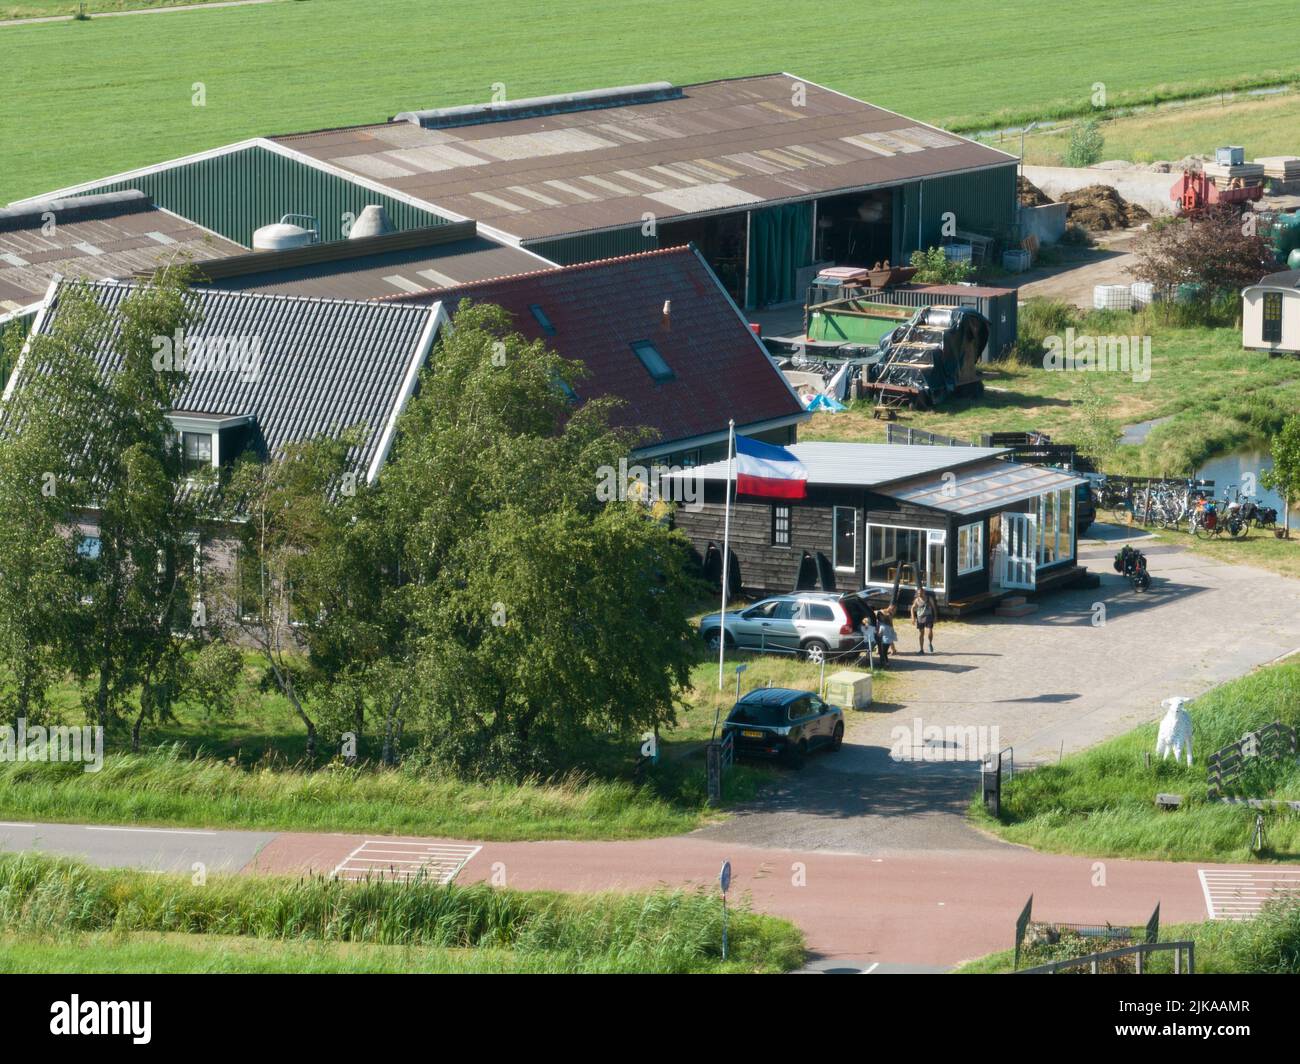 Farmers protest in The Netherlands, dutch flag upside down. Protest actions by dutch farmers. government wants to limit livestock farming to solve the Stock Photo